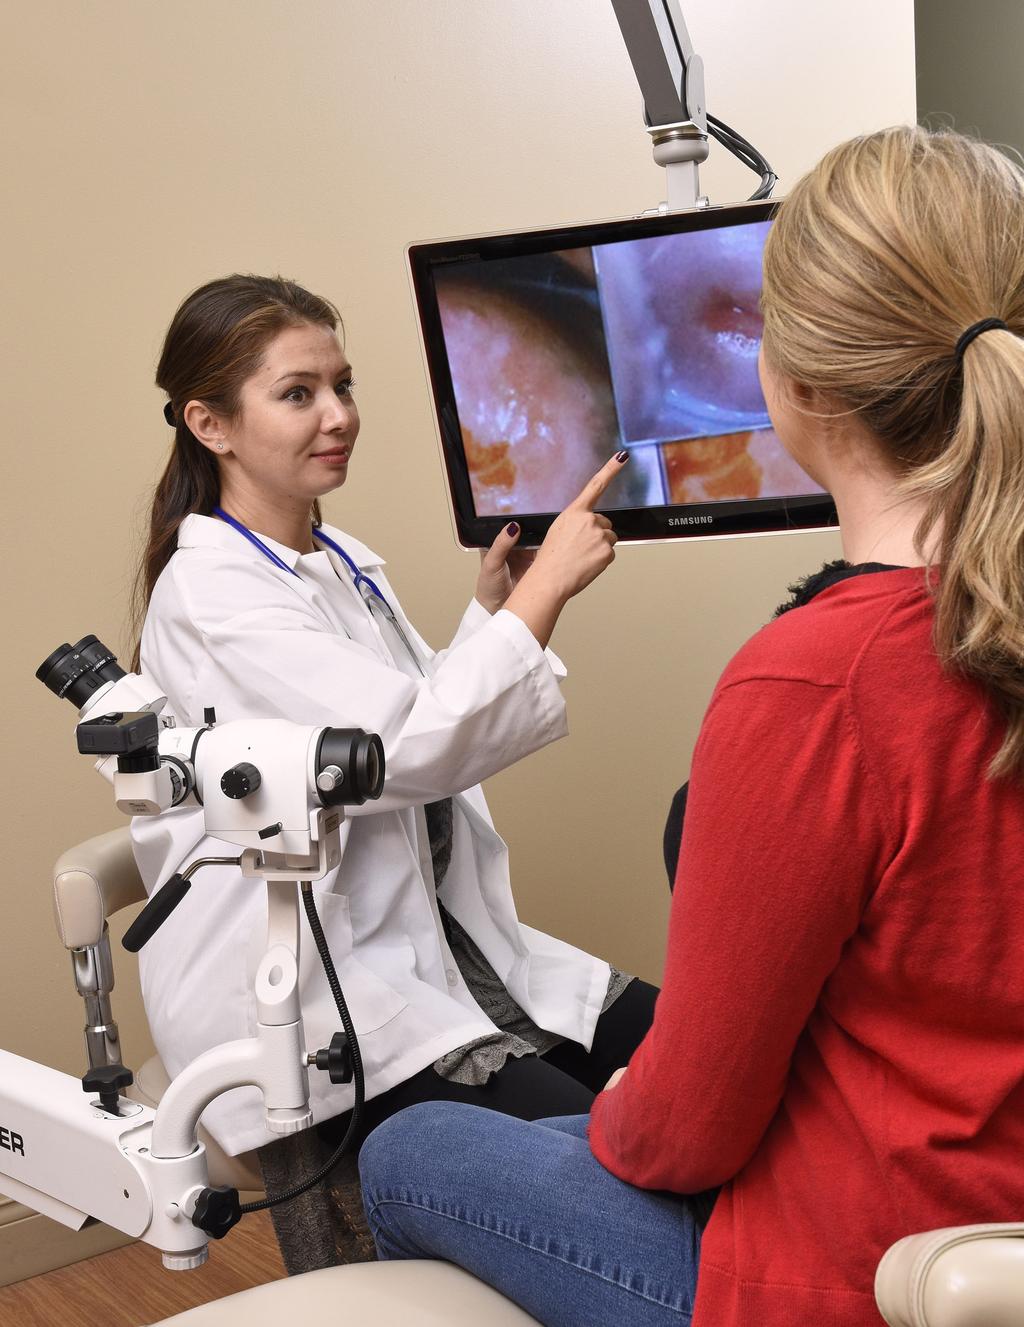 VIDEO CAPTURE By accommodating a full HD video camera able to capture 4K video, OBGYNs can have better discussion with patients about their concerns.